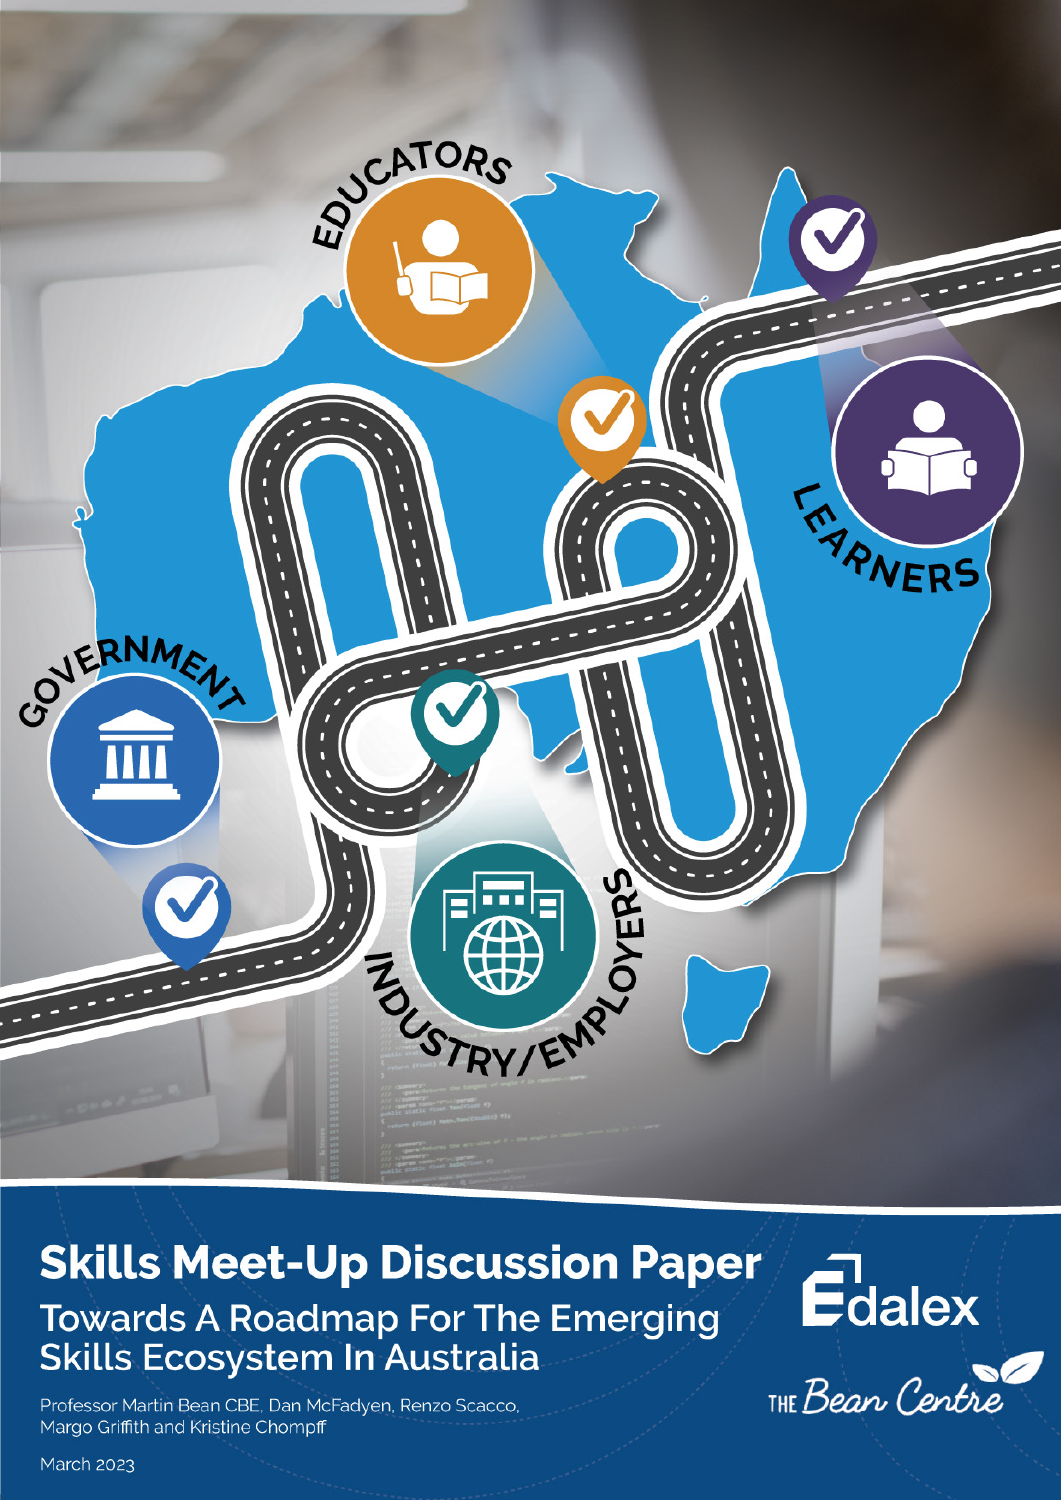 Skills Meet-Up Discussion Paper: Towards A Roadmap For The Emerging Skills Ecosystem In Australia